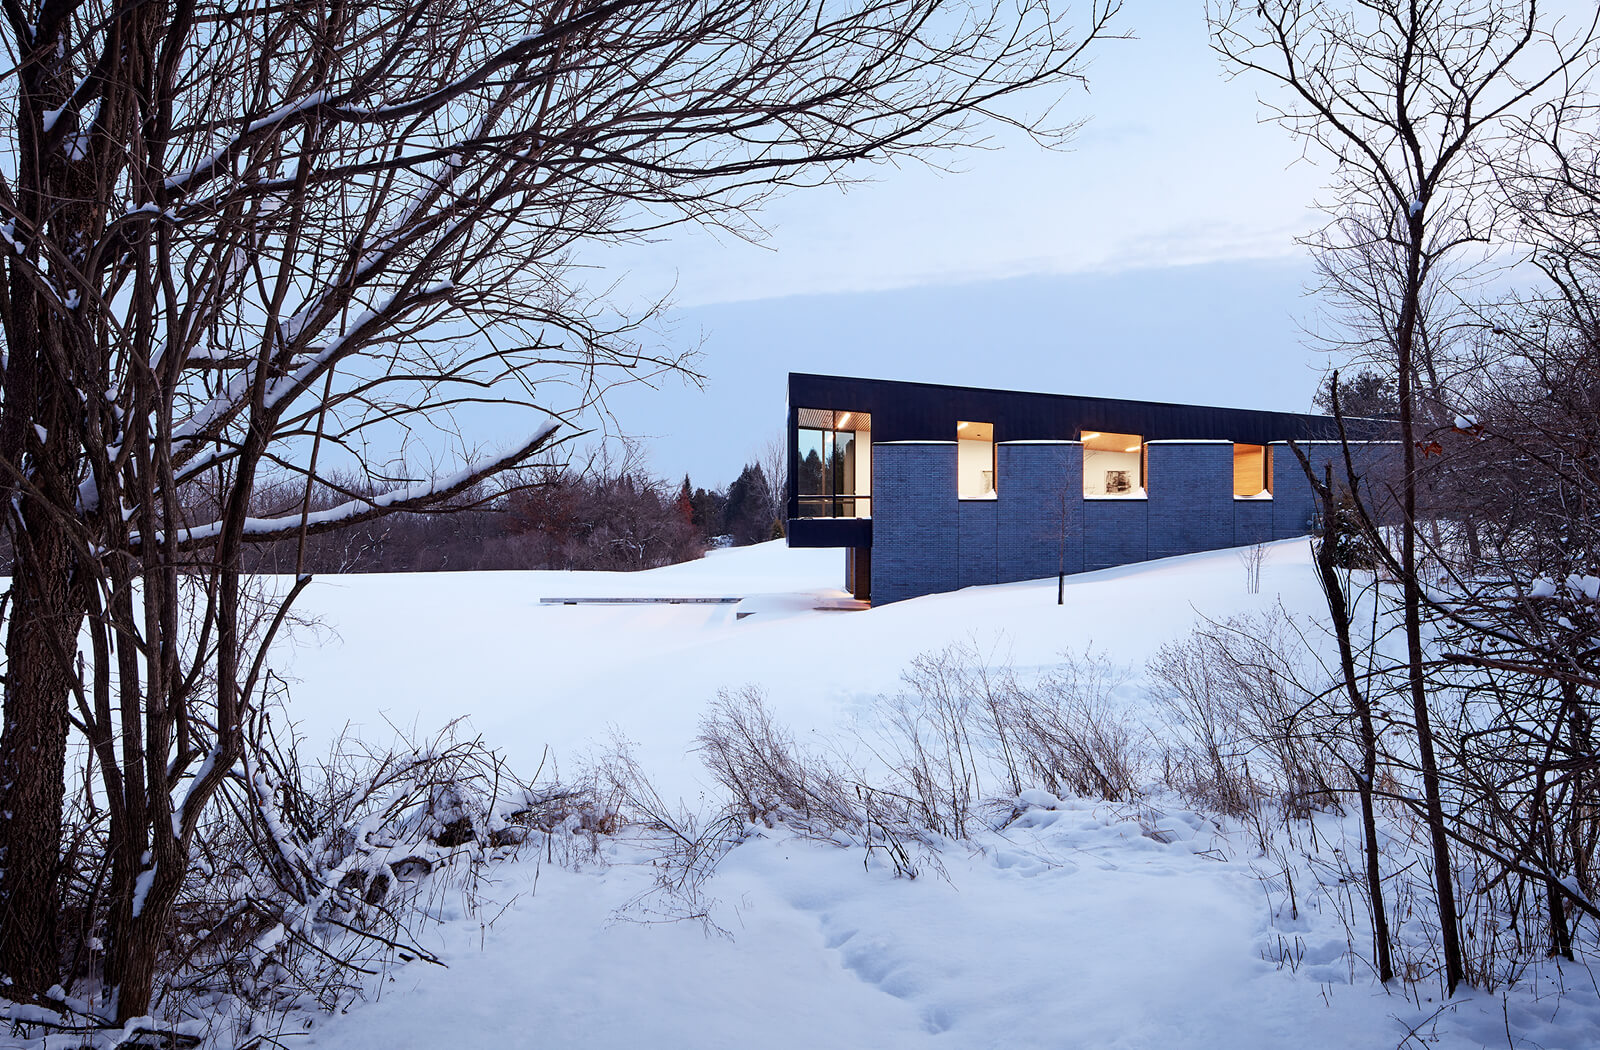 Treehuis / substance architecture